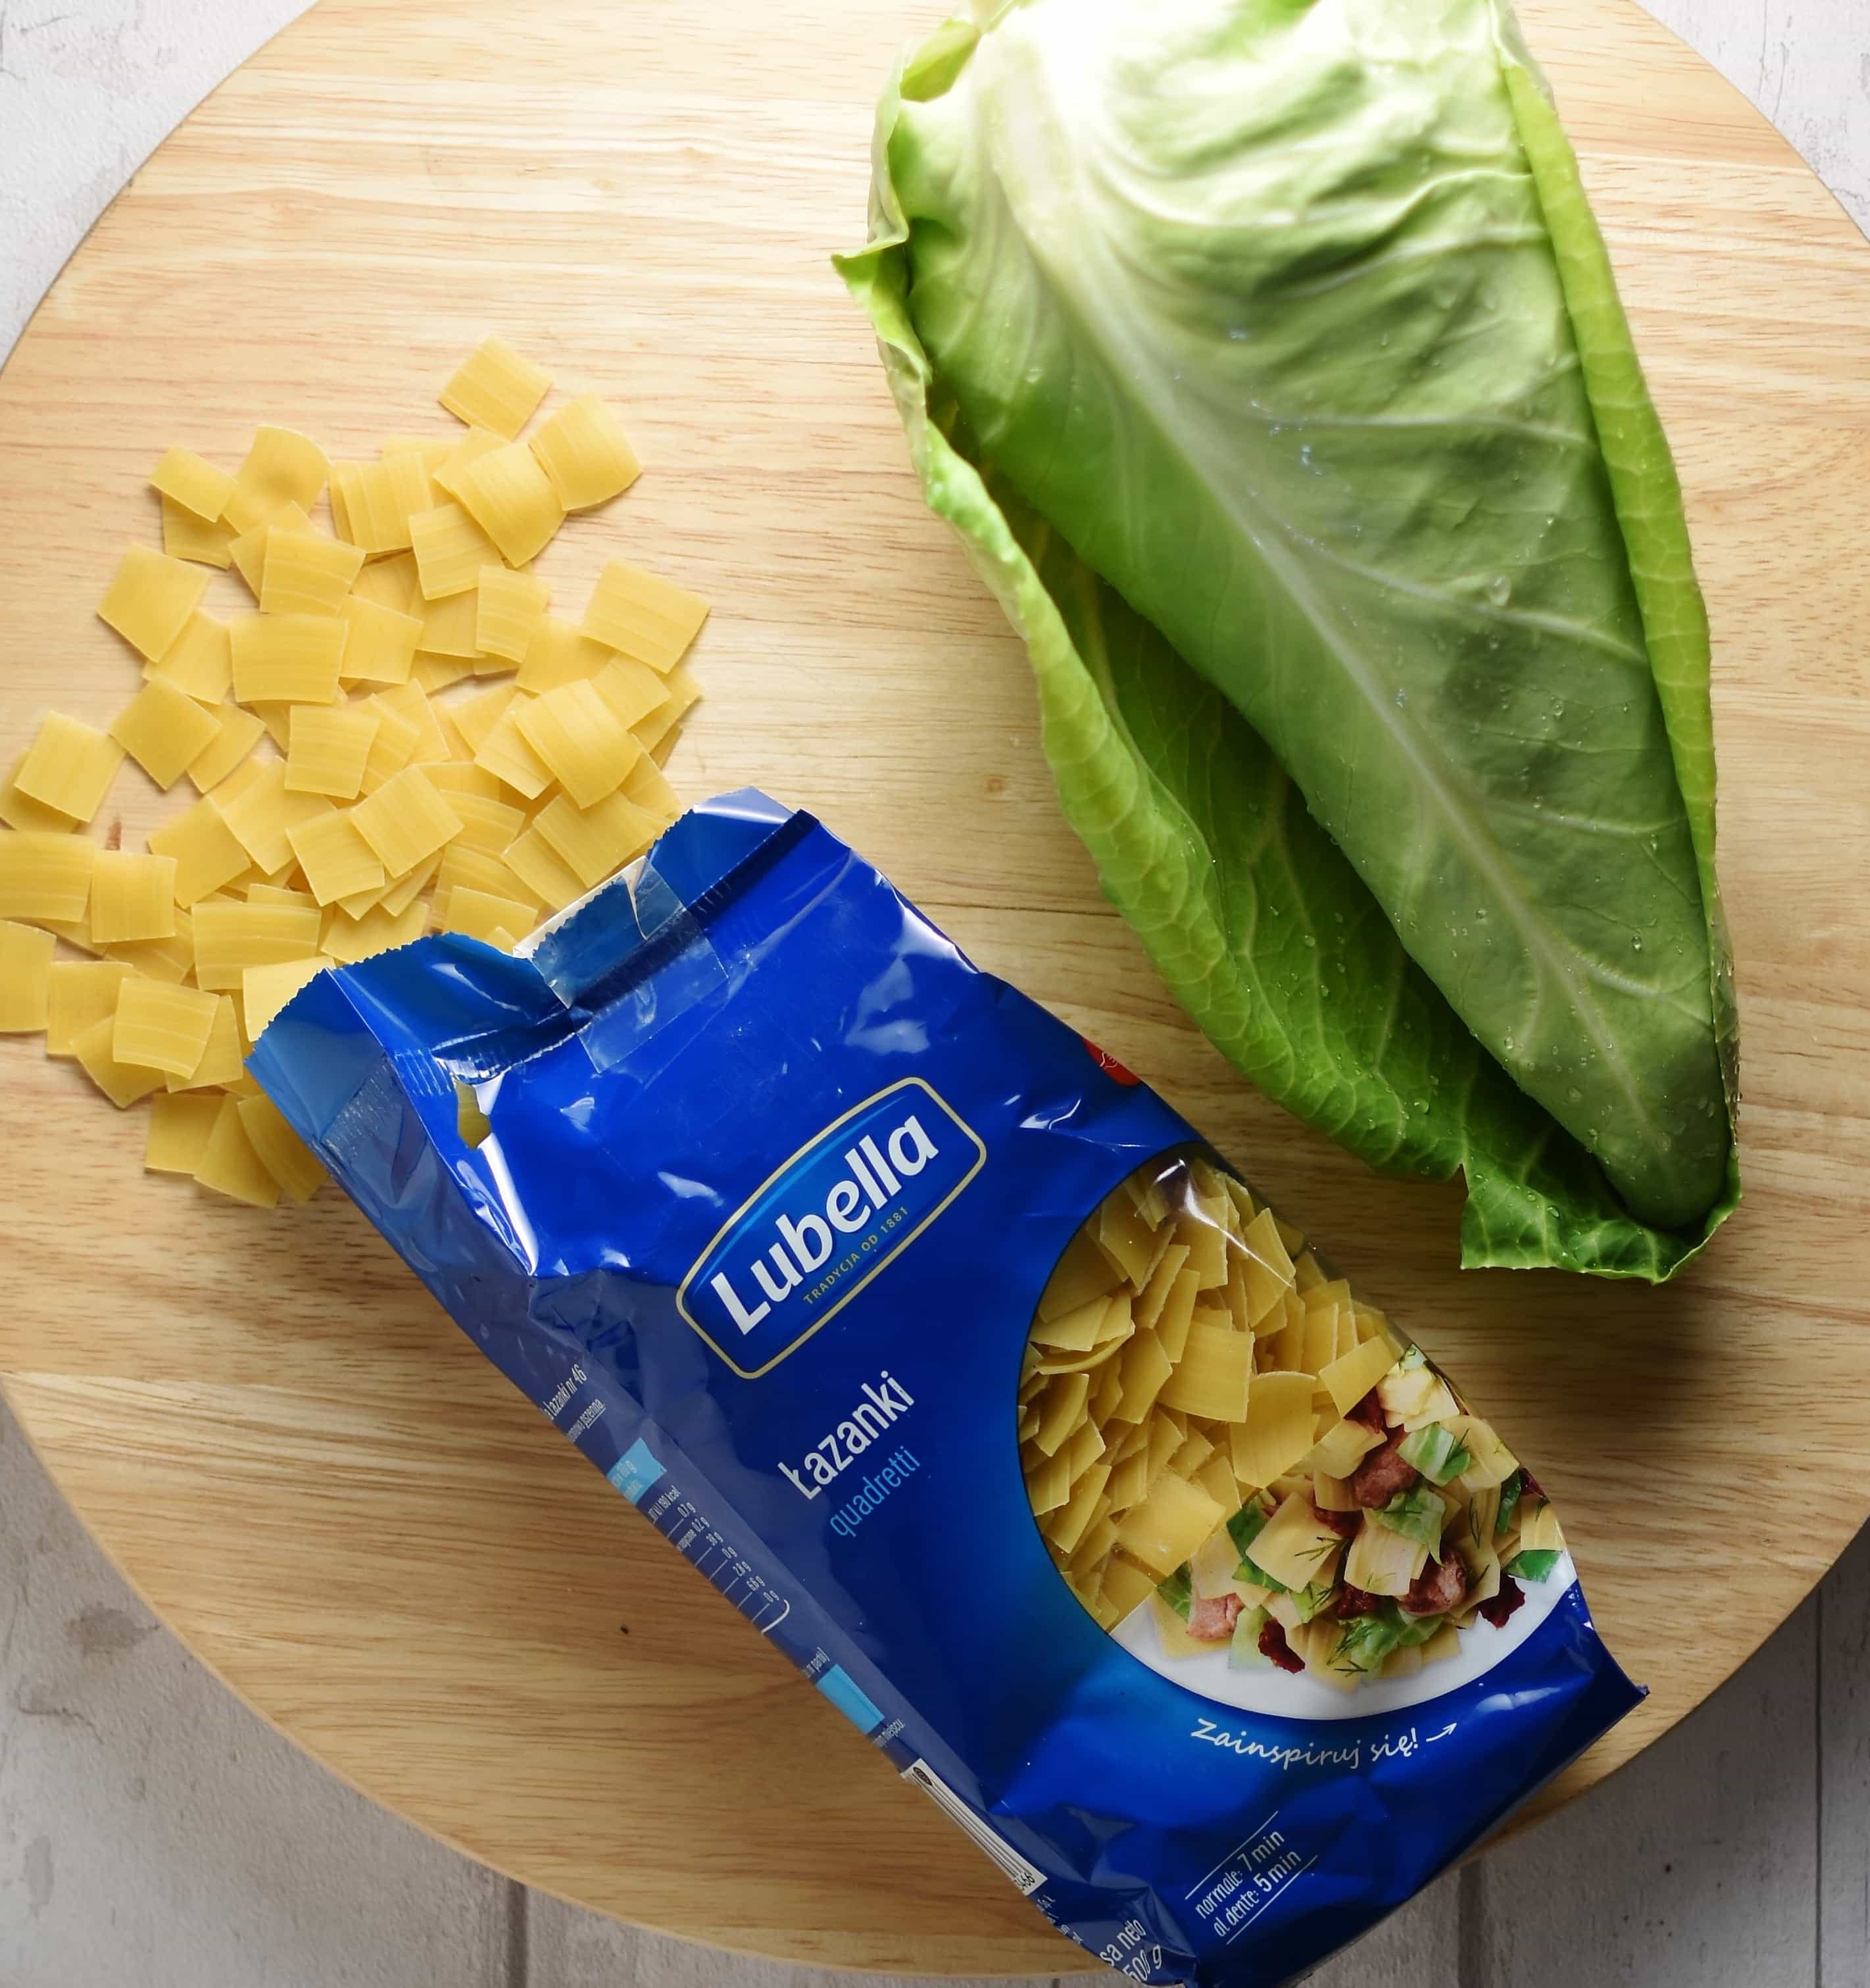 Top down view of Polish lazanki pasta in package, with pointed cabbage on top of round wooden board.